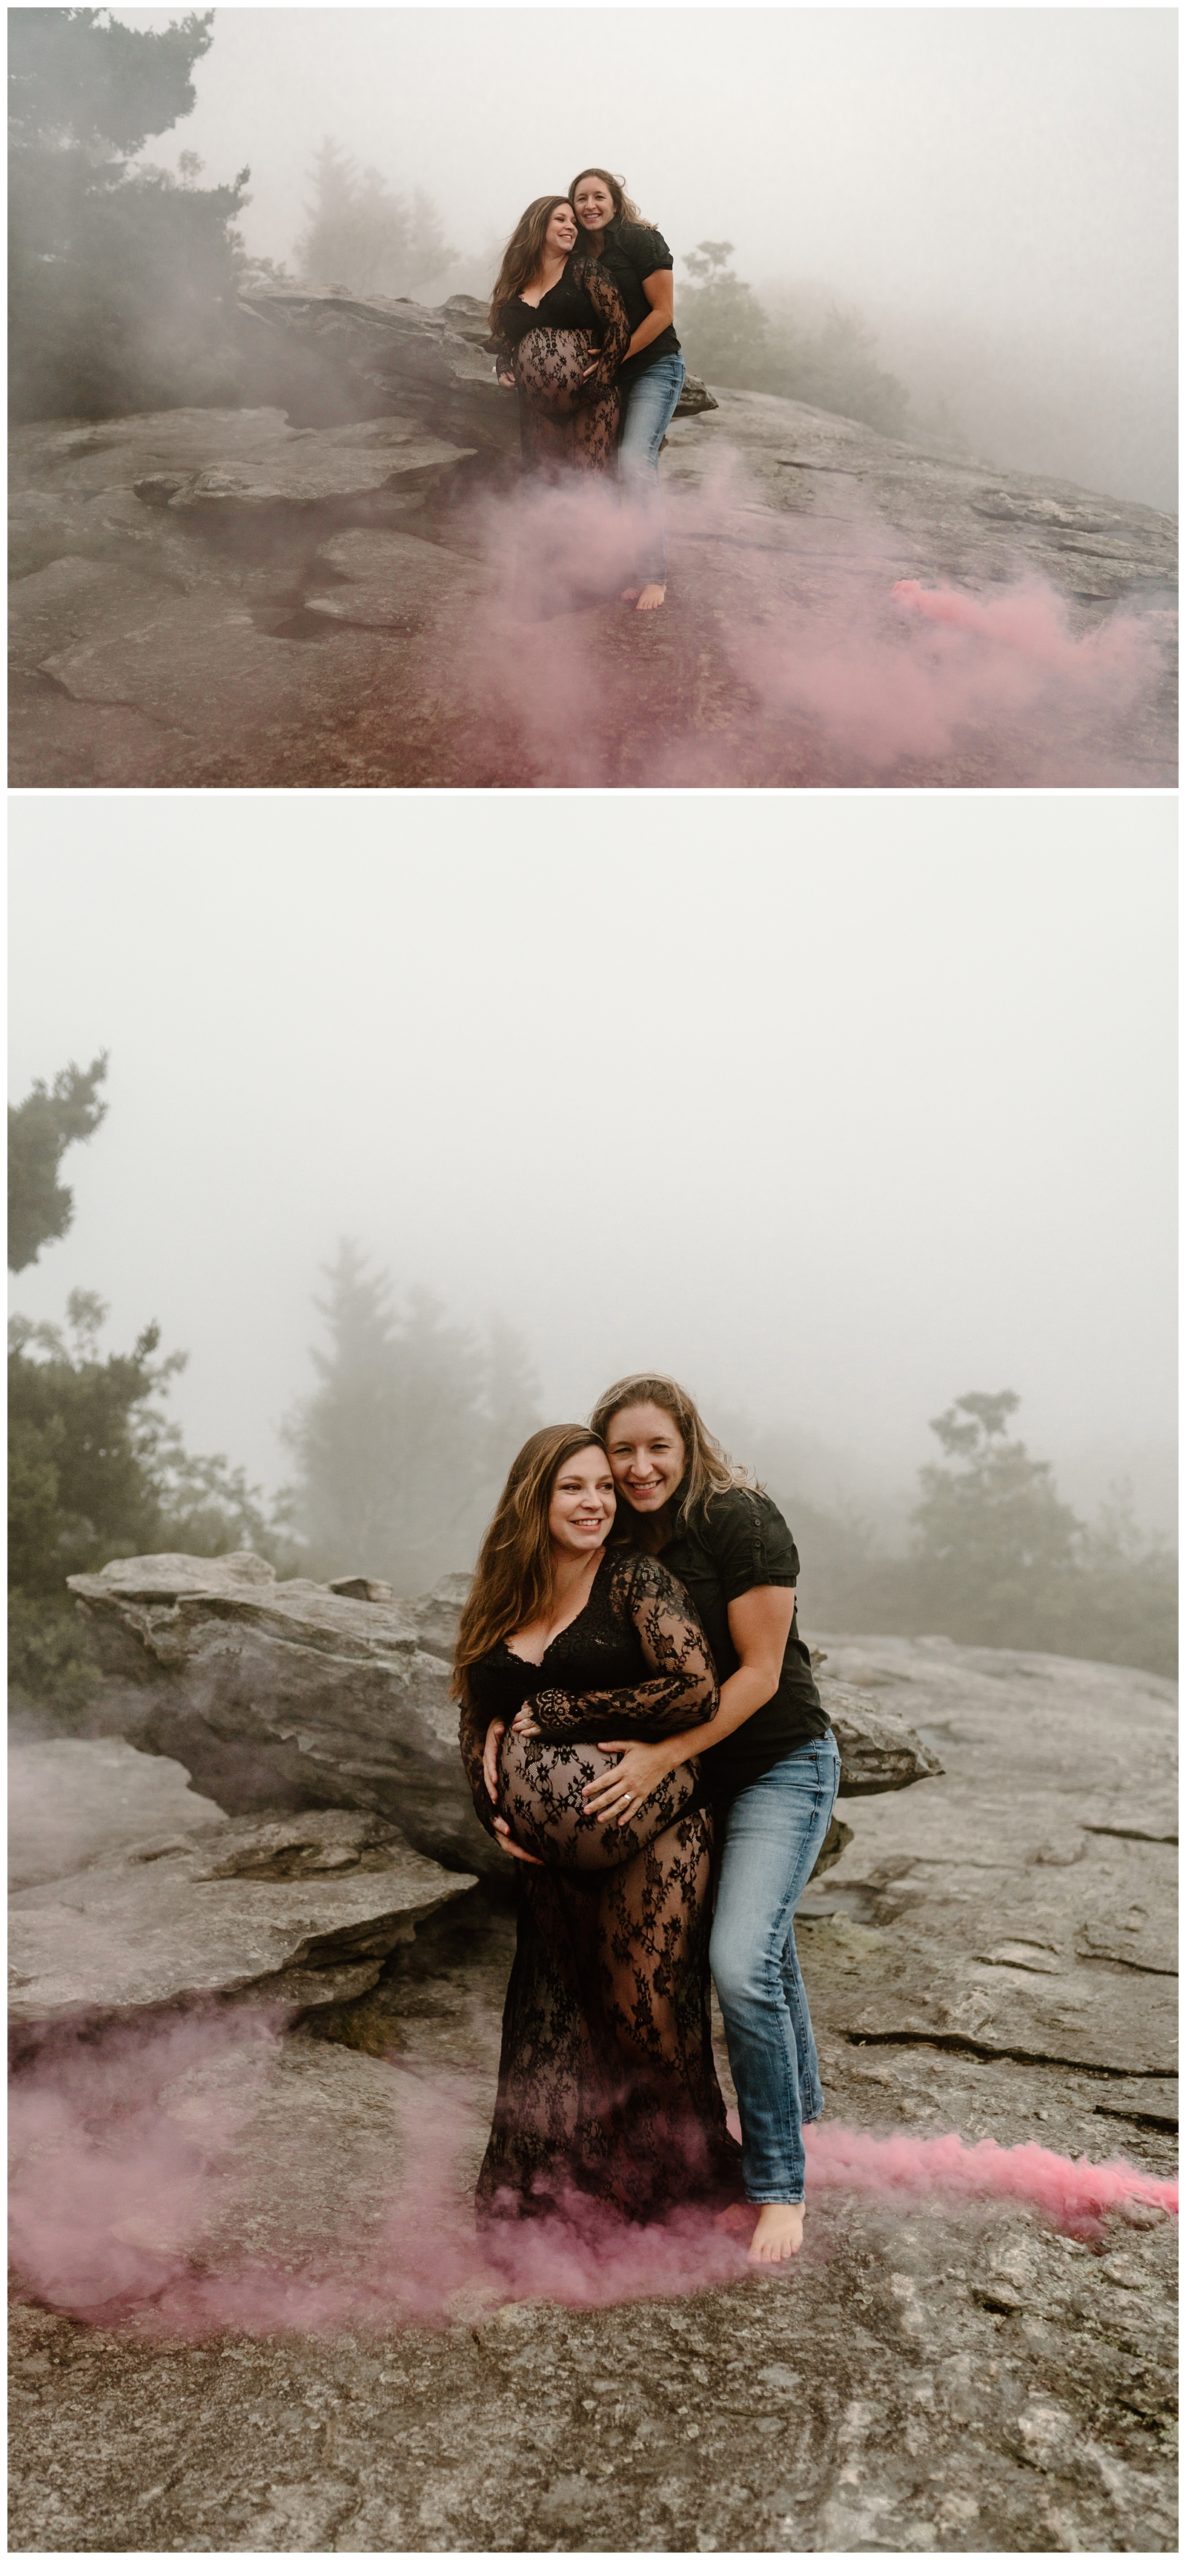 Foggy mountain top maternity session with same-sex couple by North Carolina photographer